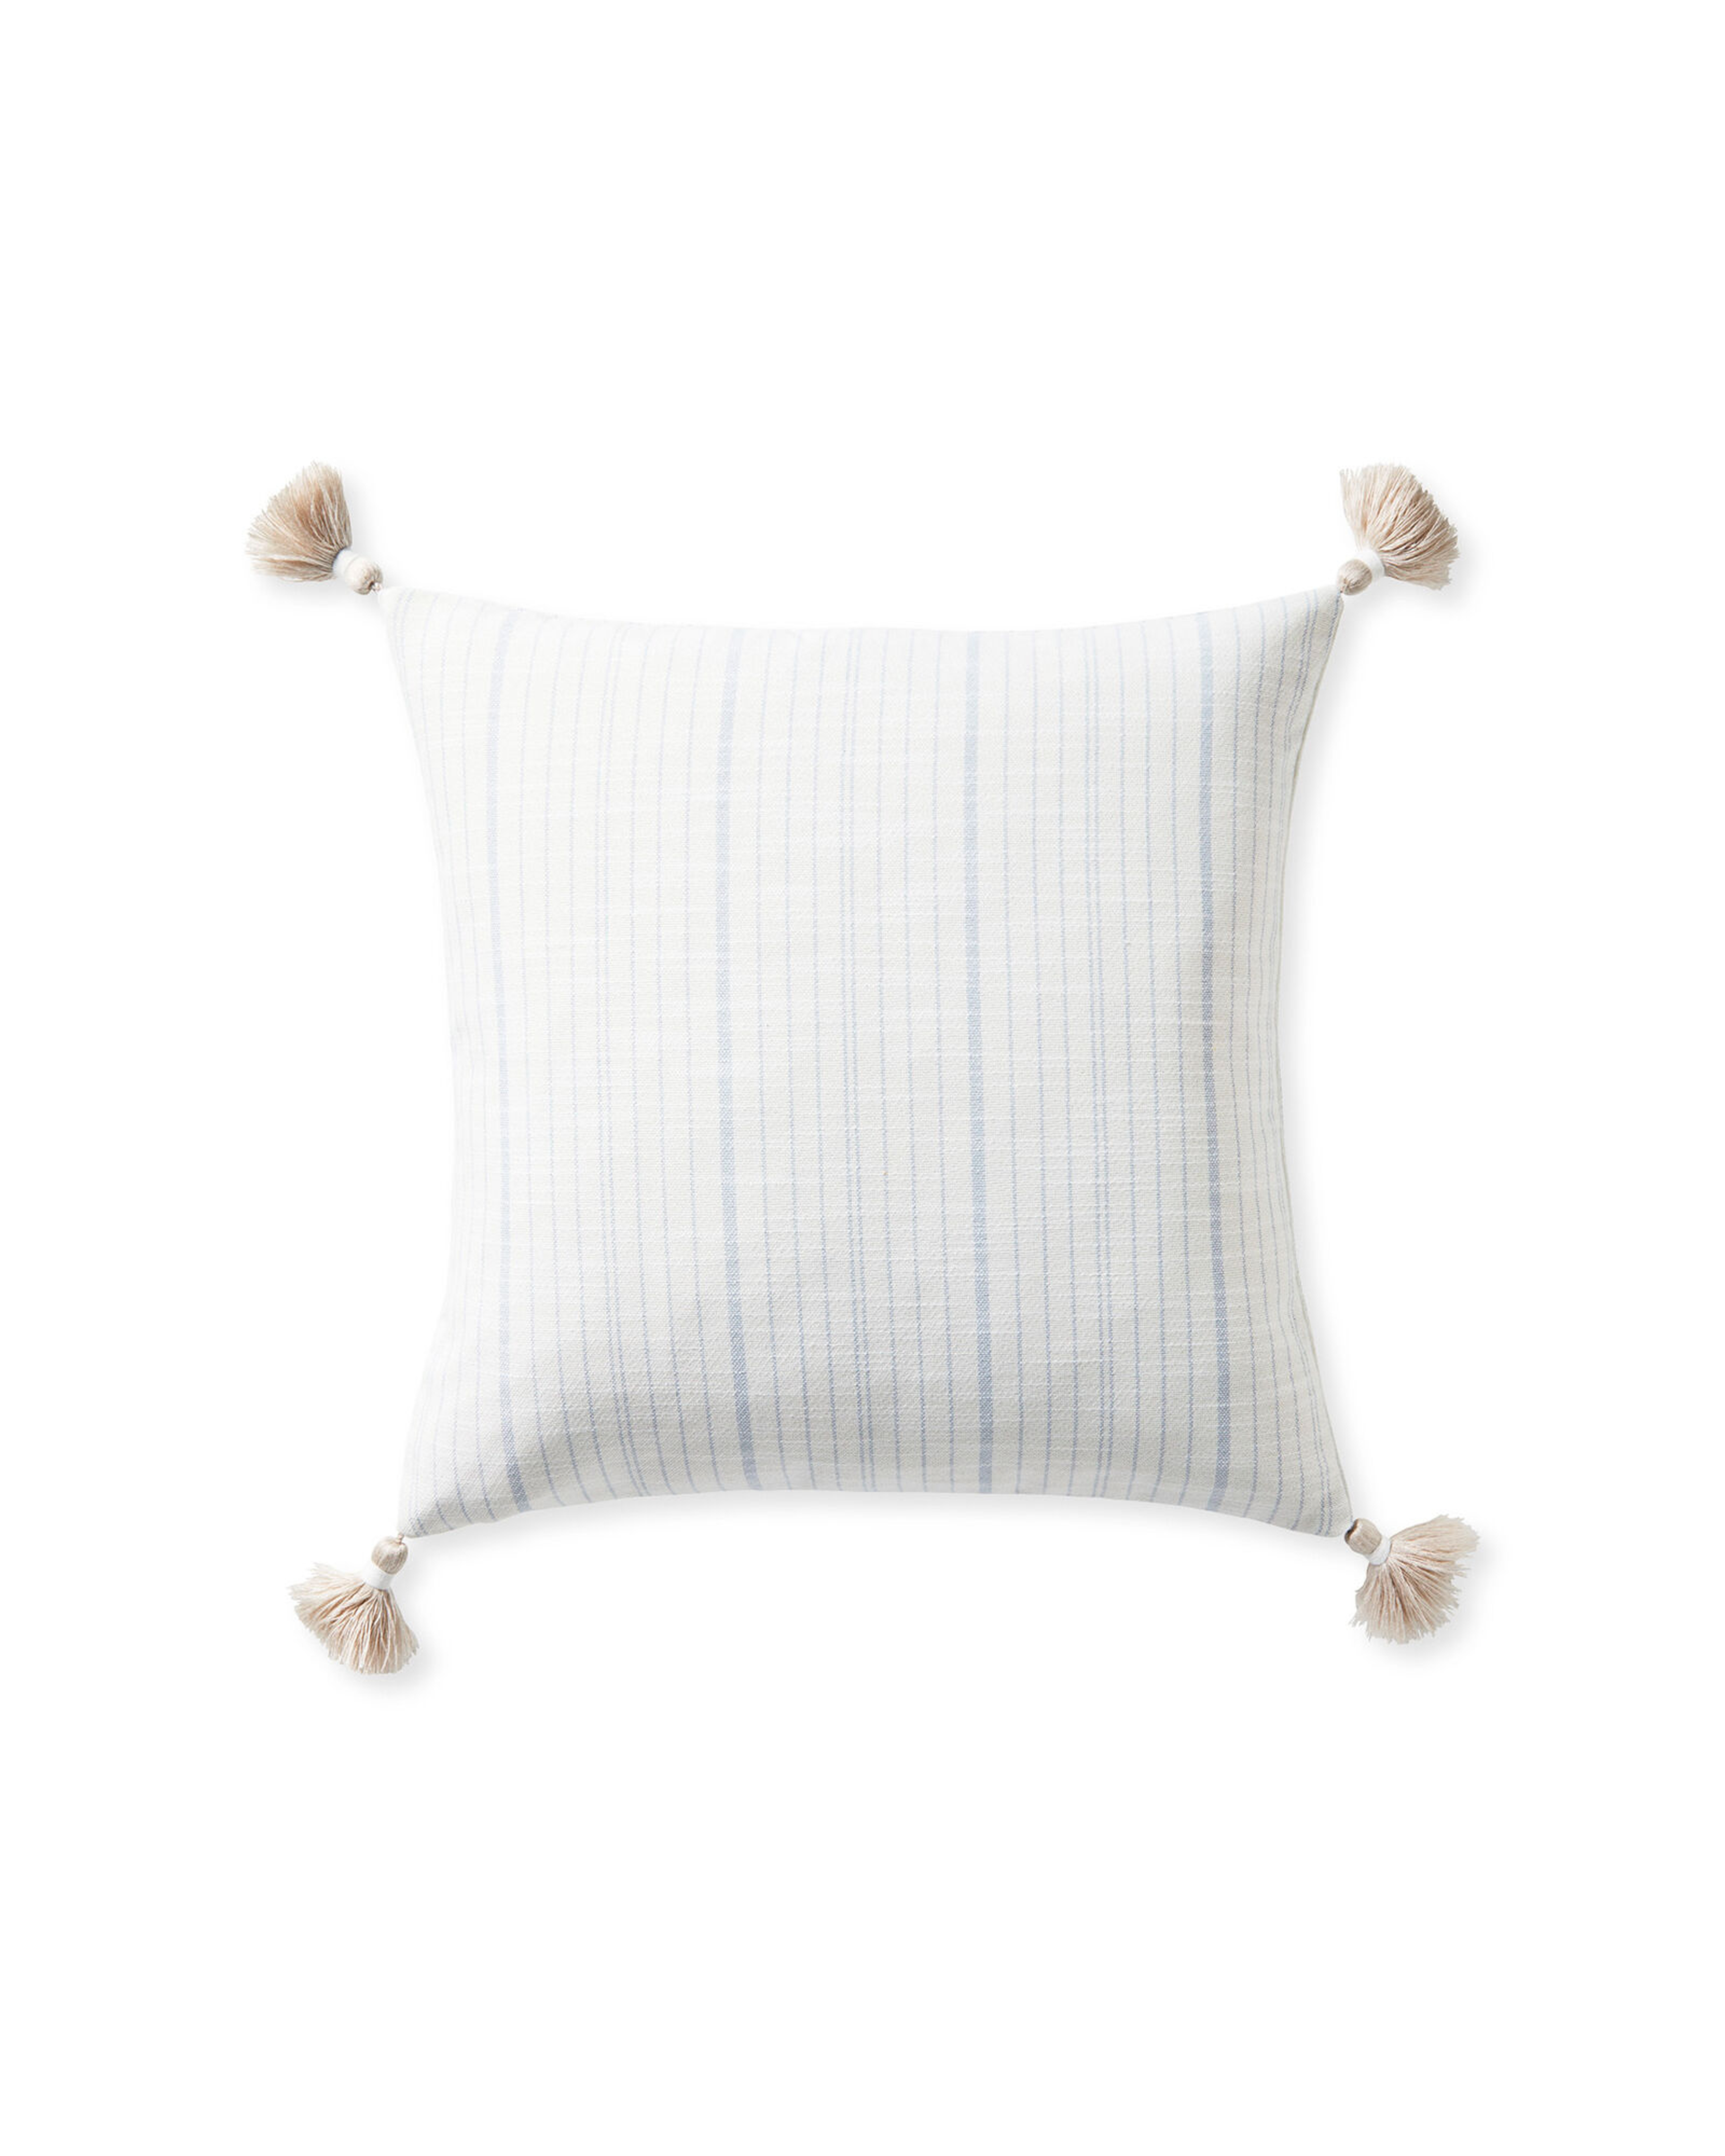 Surf Stripe Pillow Cover - Serena and Lily